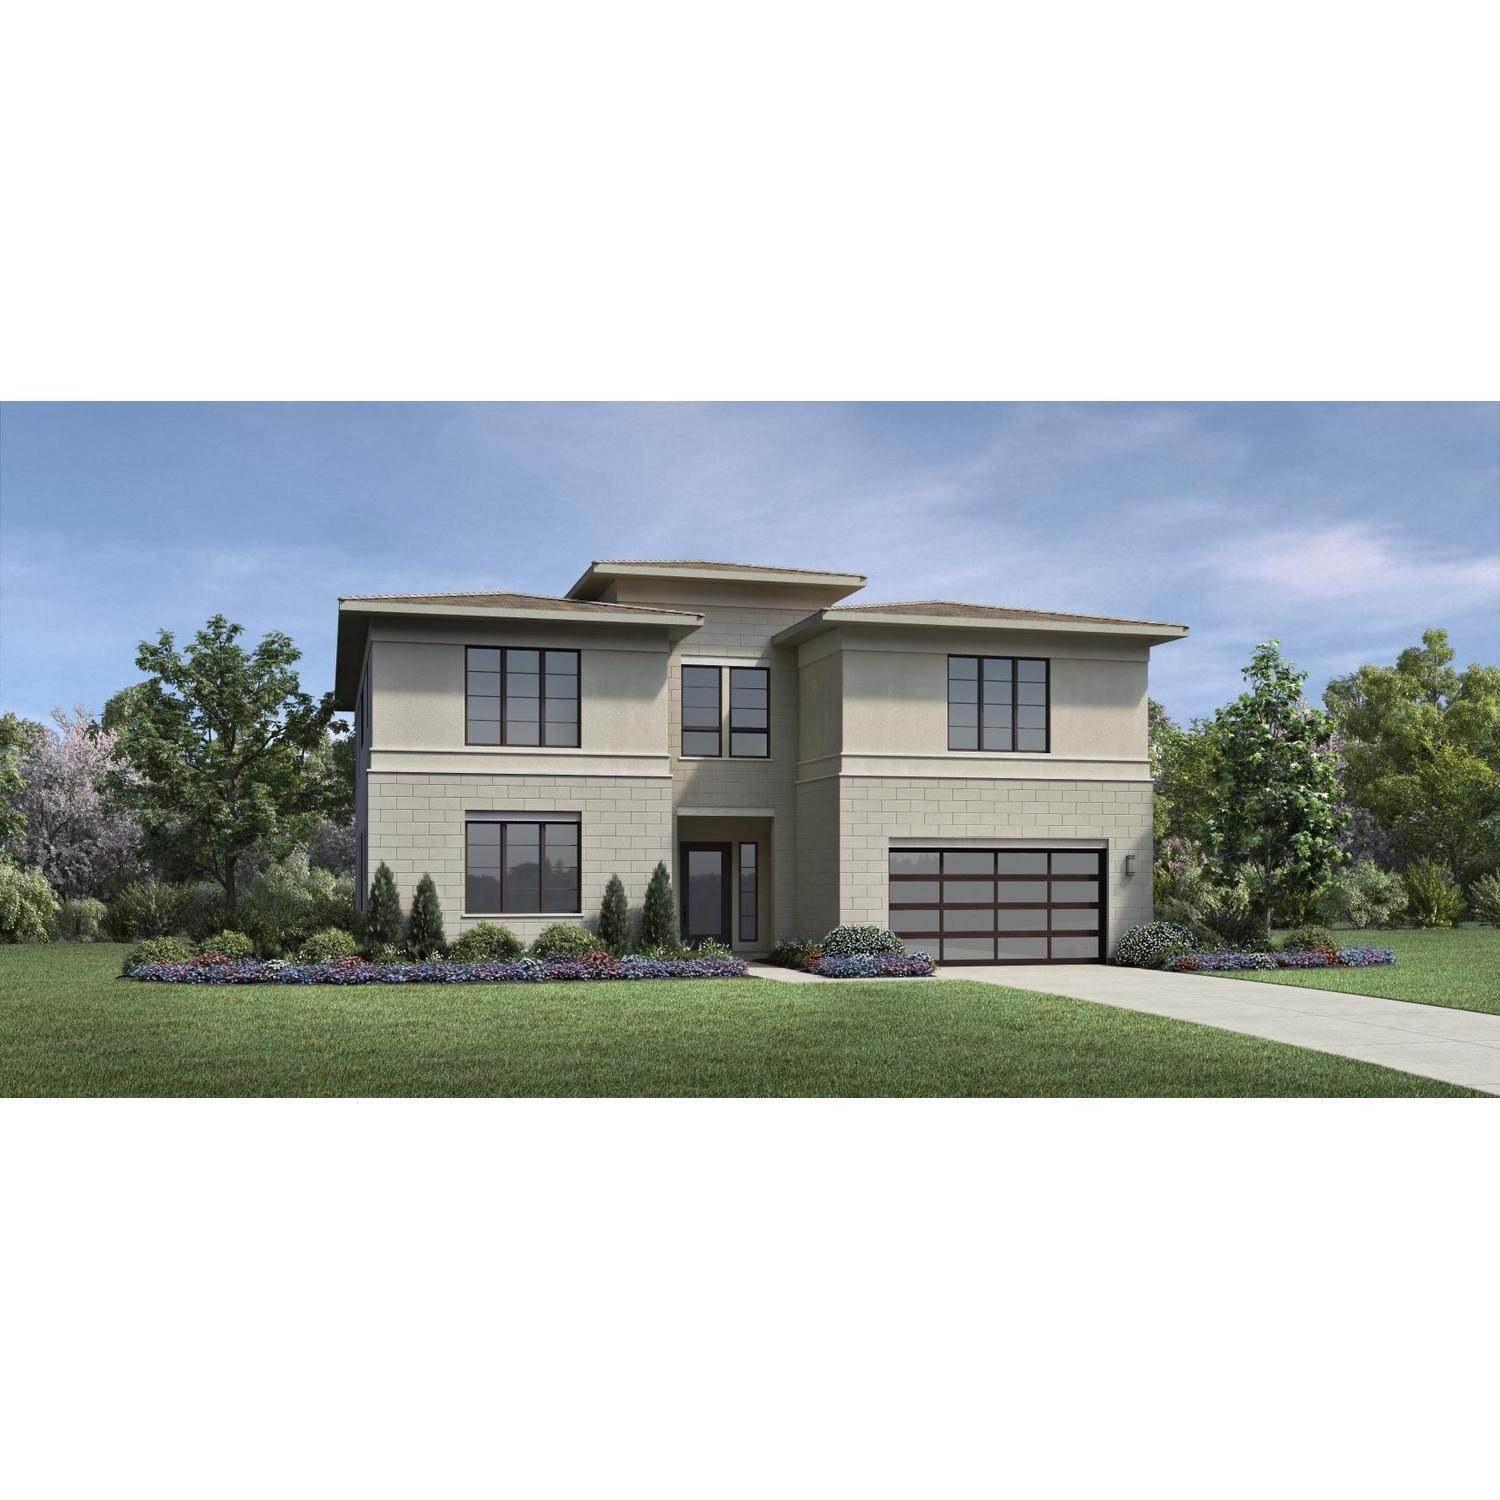 Single Family for Sale at Westcliffe At Porter Ranch - Summit Collection - Asti 20406 West Marlow Ln PORTER RANCH, CALIFORNIA 91326 UNITED STATES